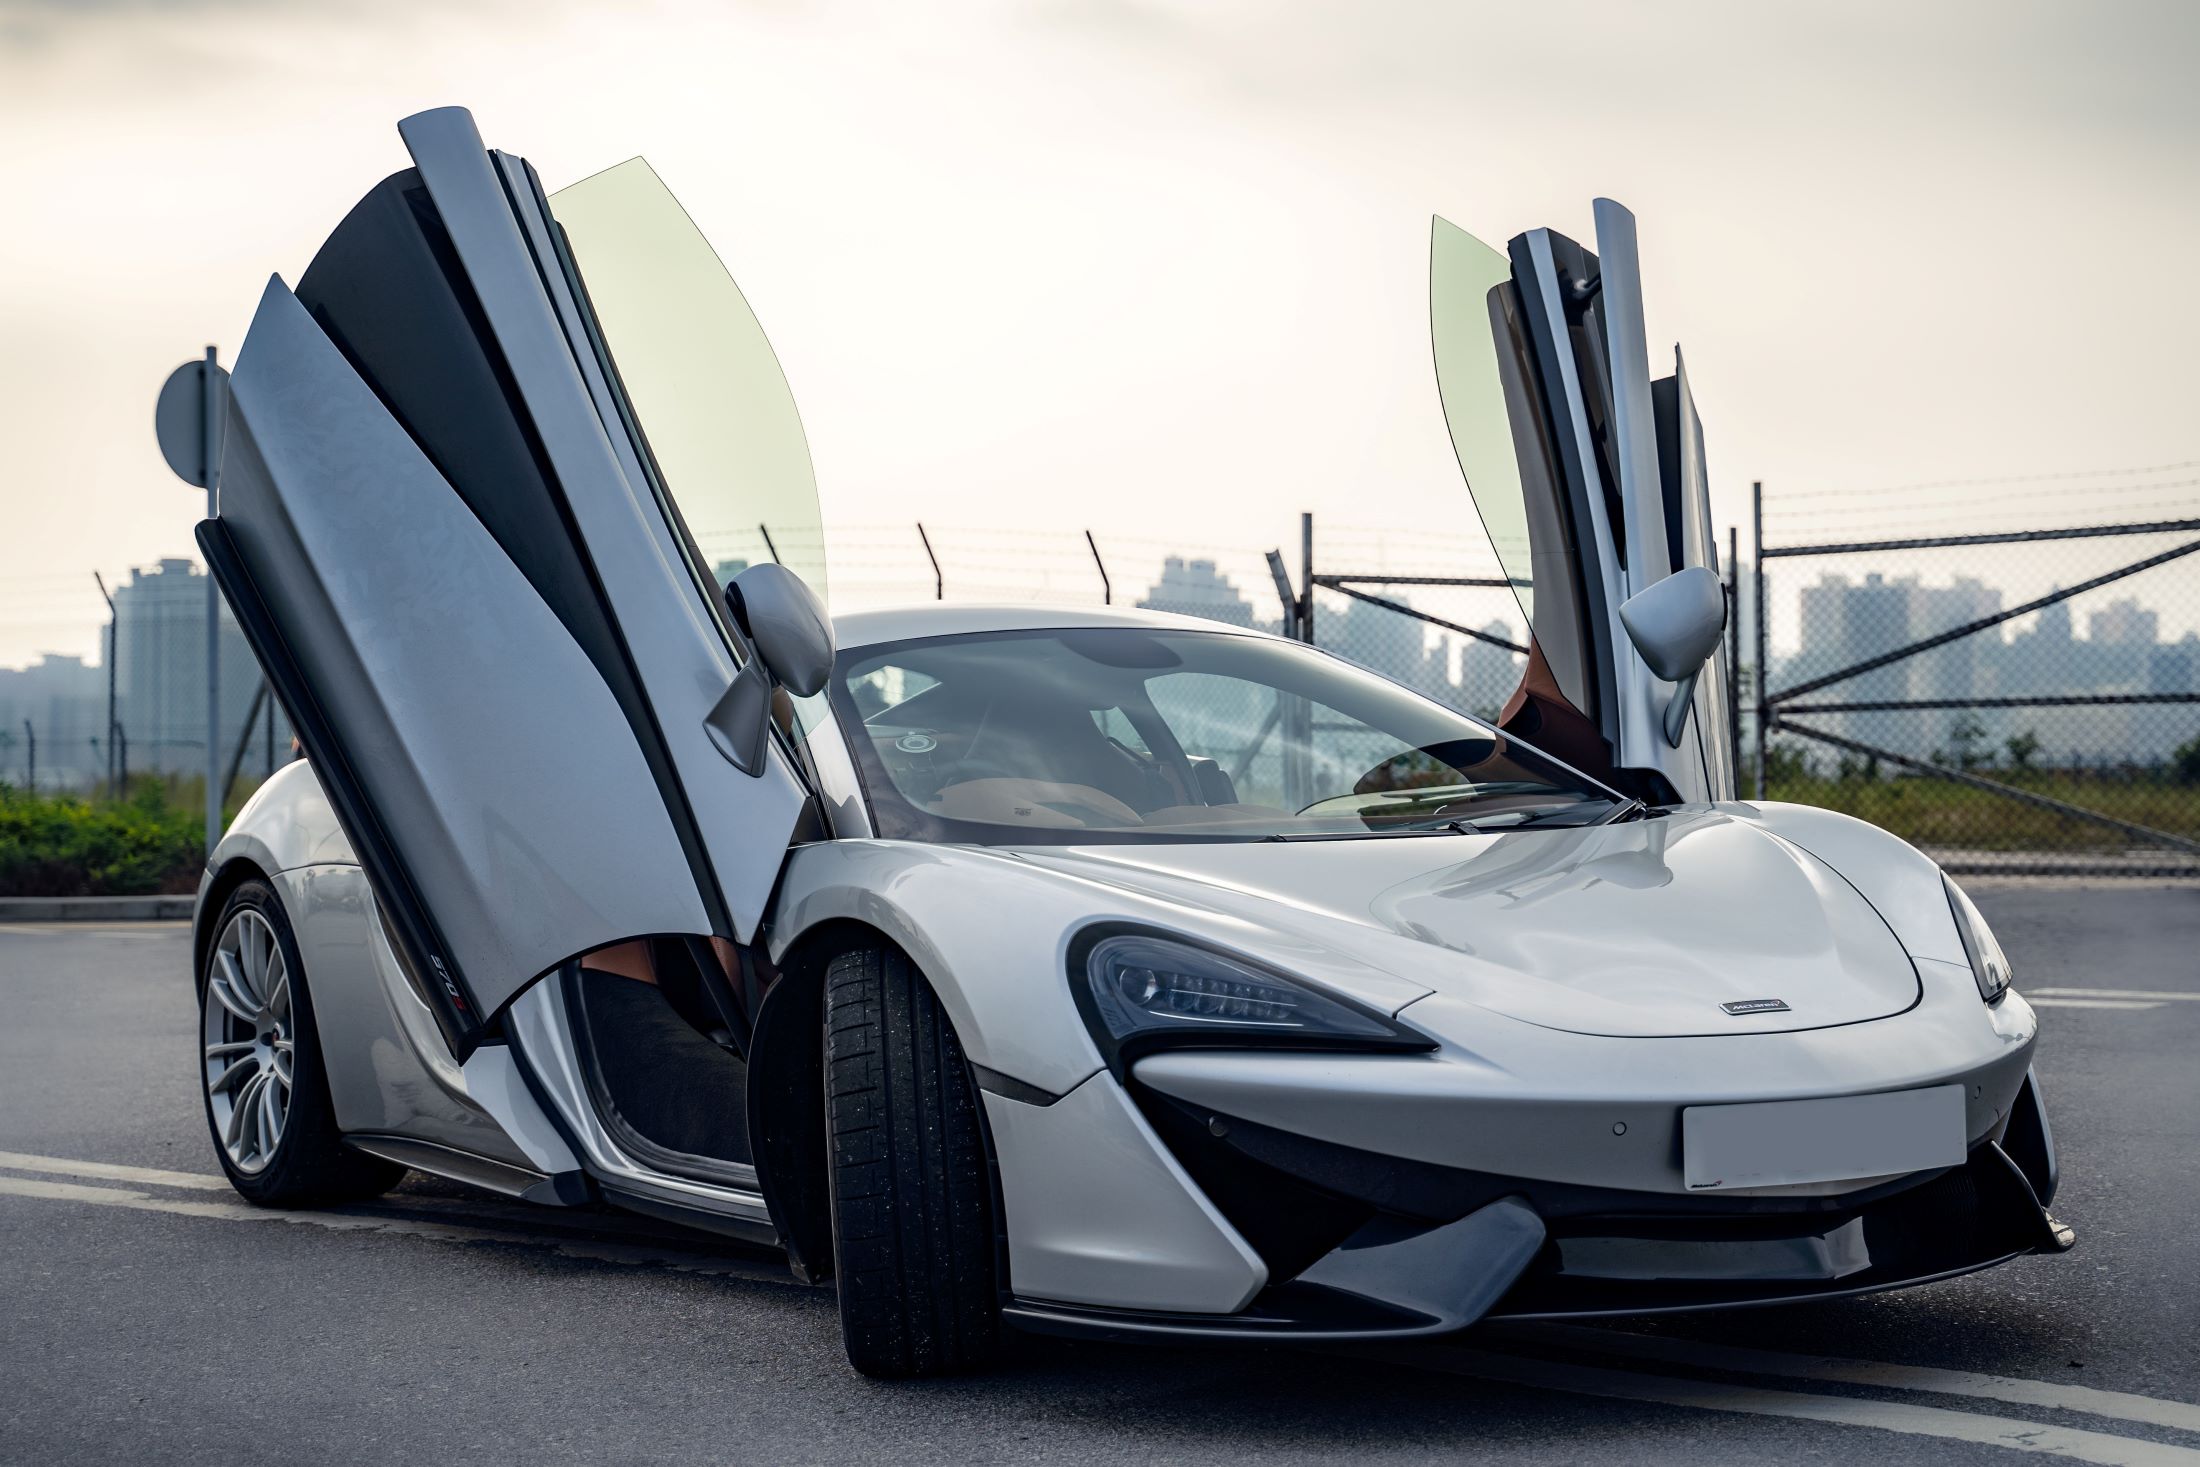 An image of a White Mclaren with the doors up.